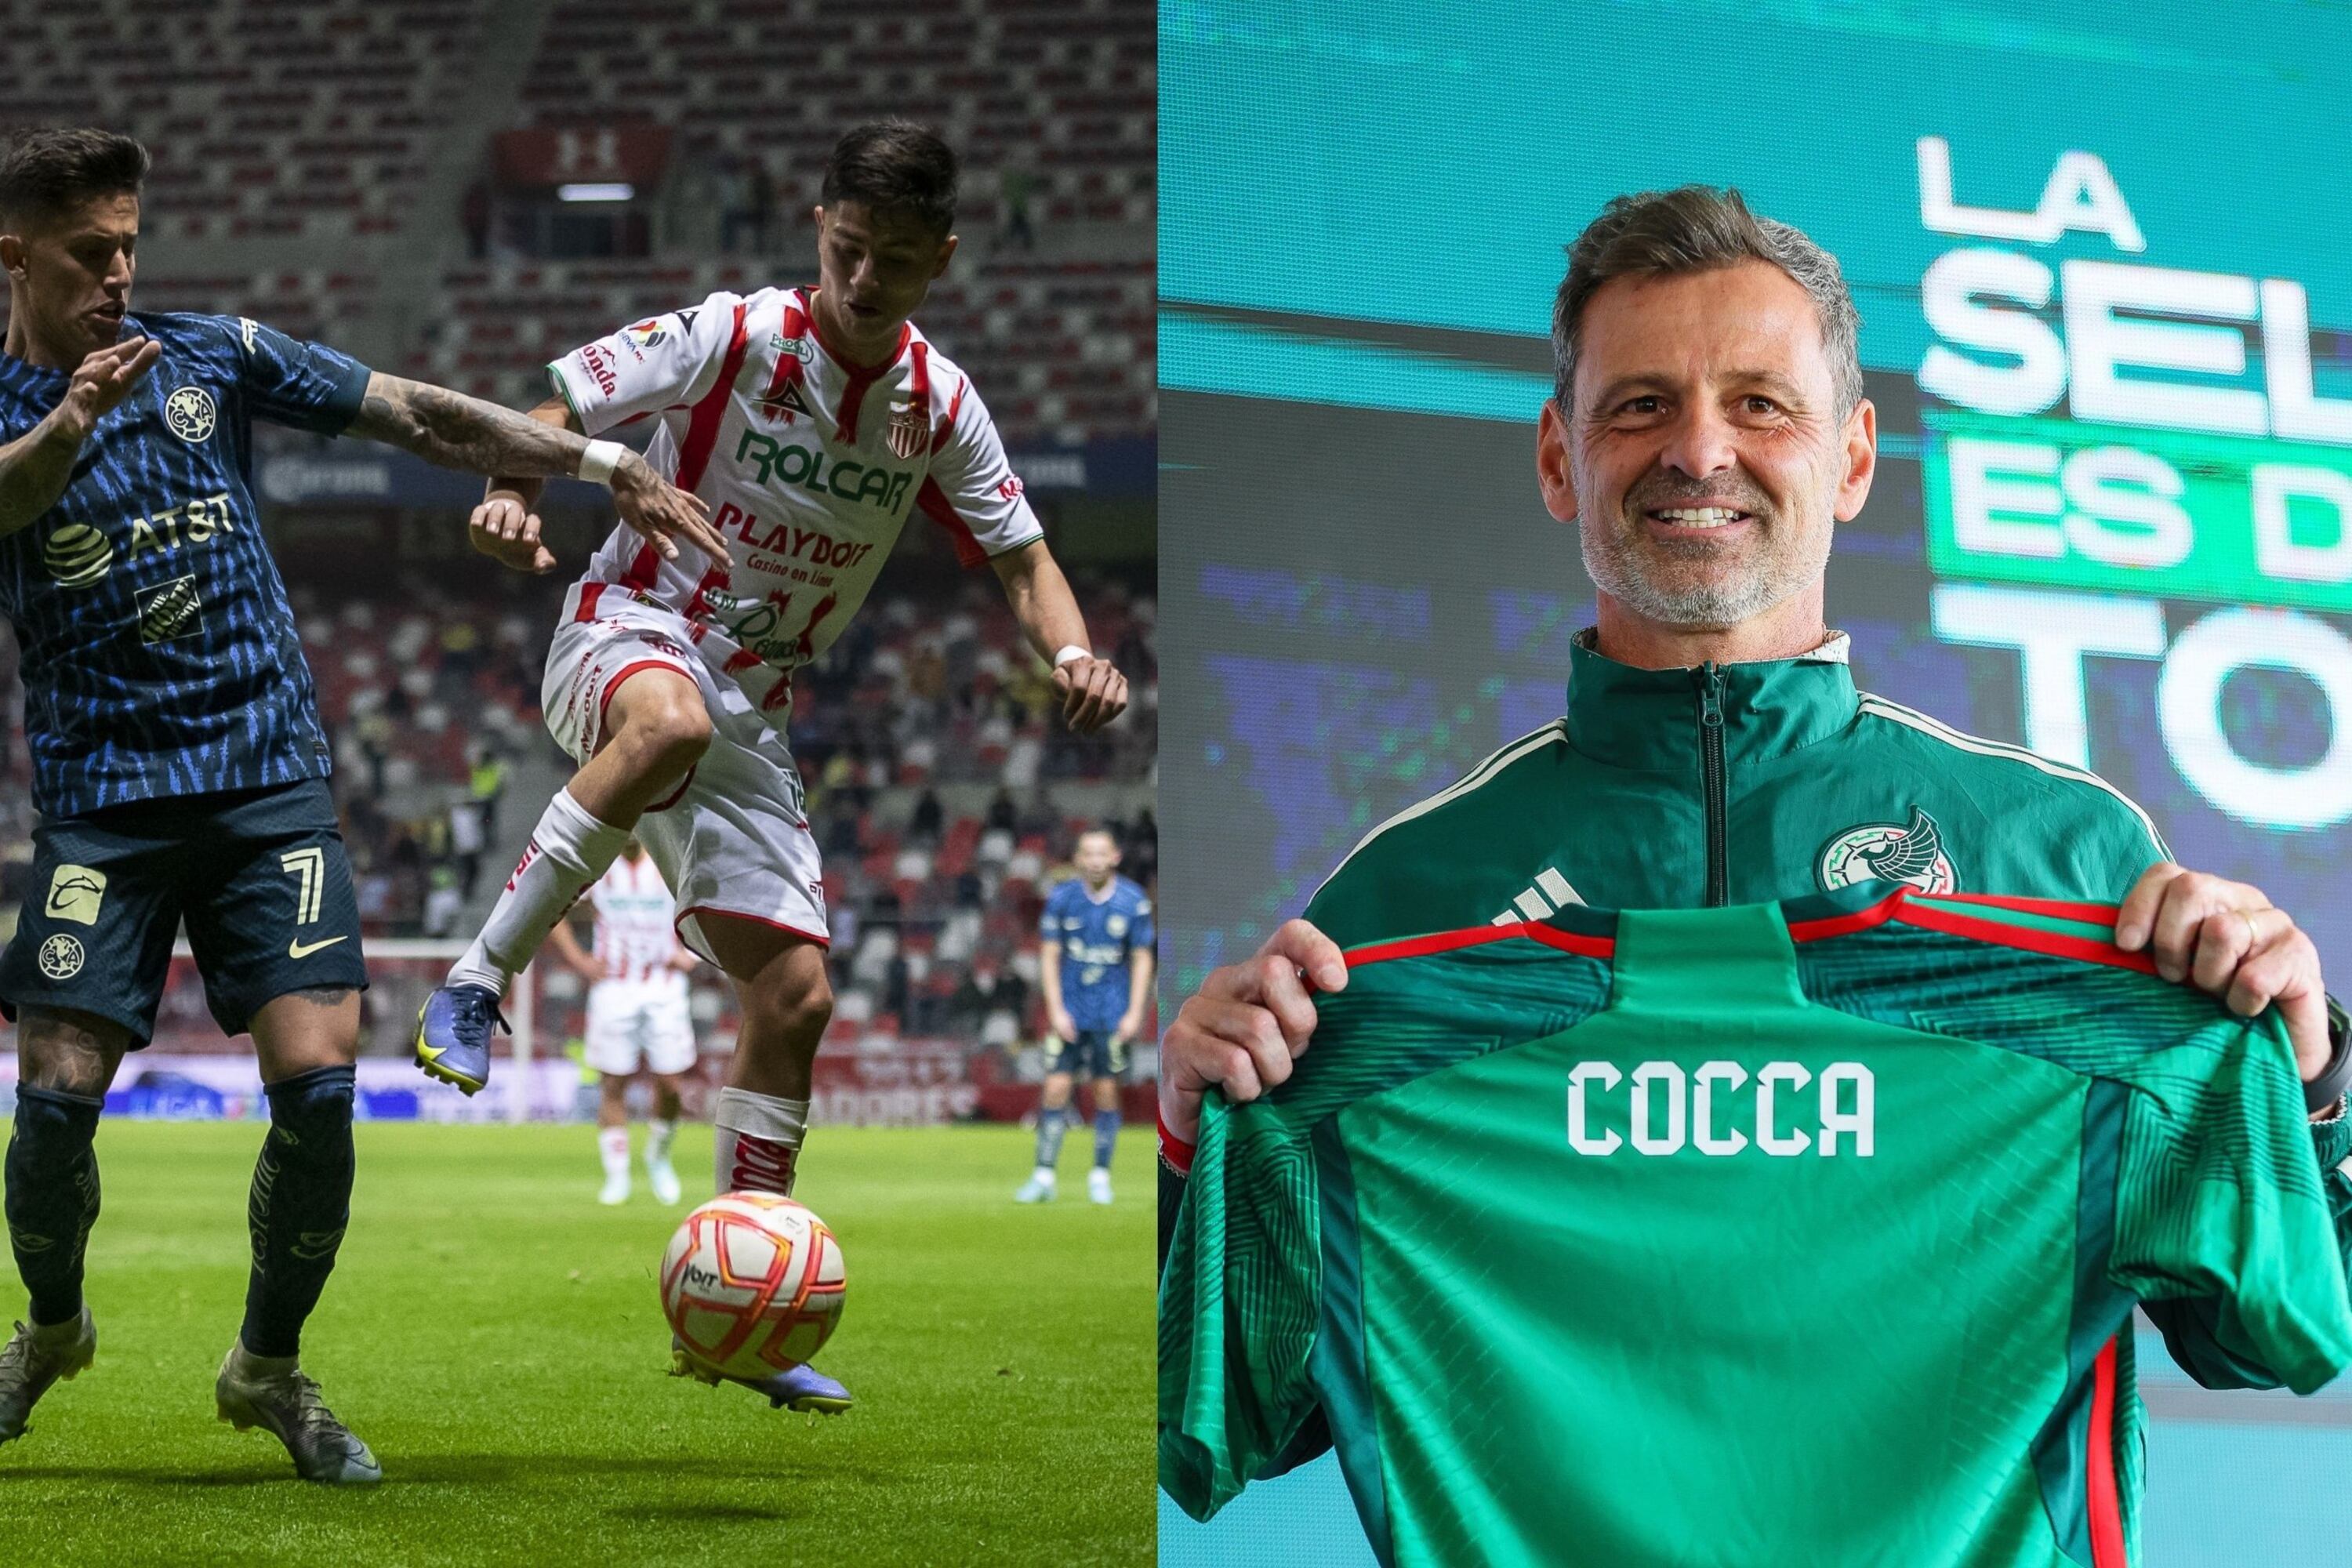 He just arrived at El Tri, Diego Cocca's unexpected action at Club America vs Necaxa